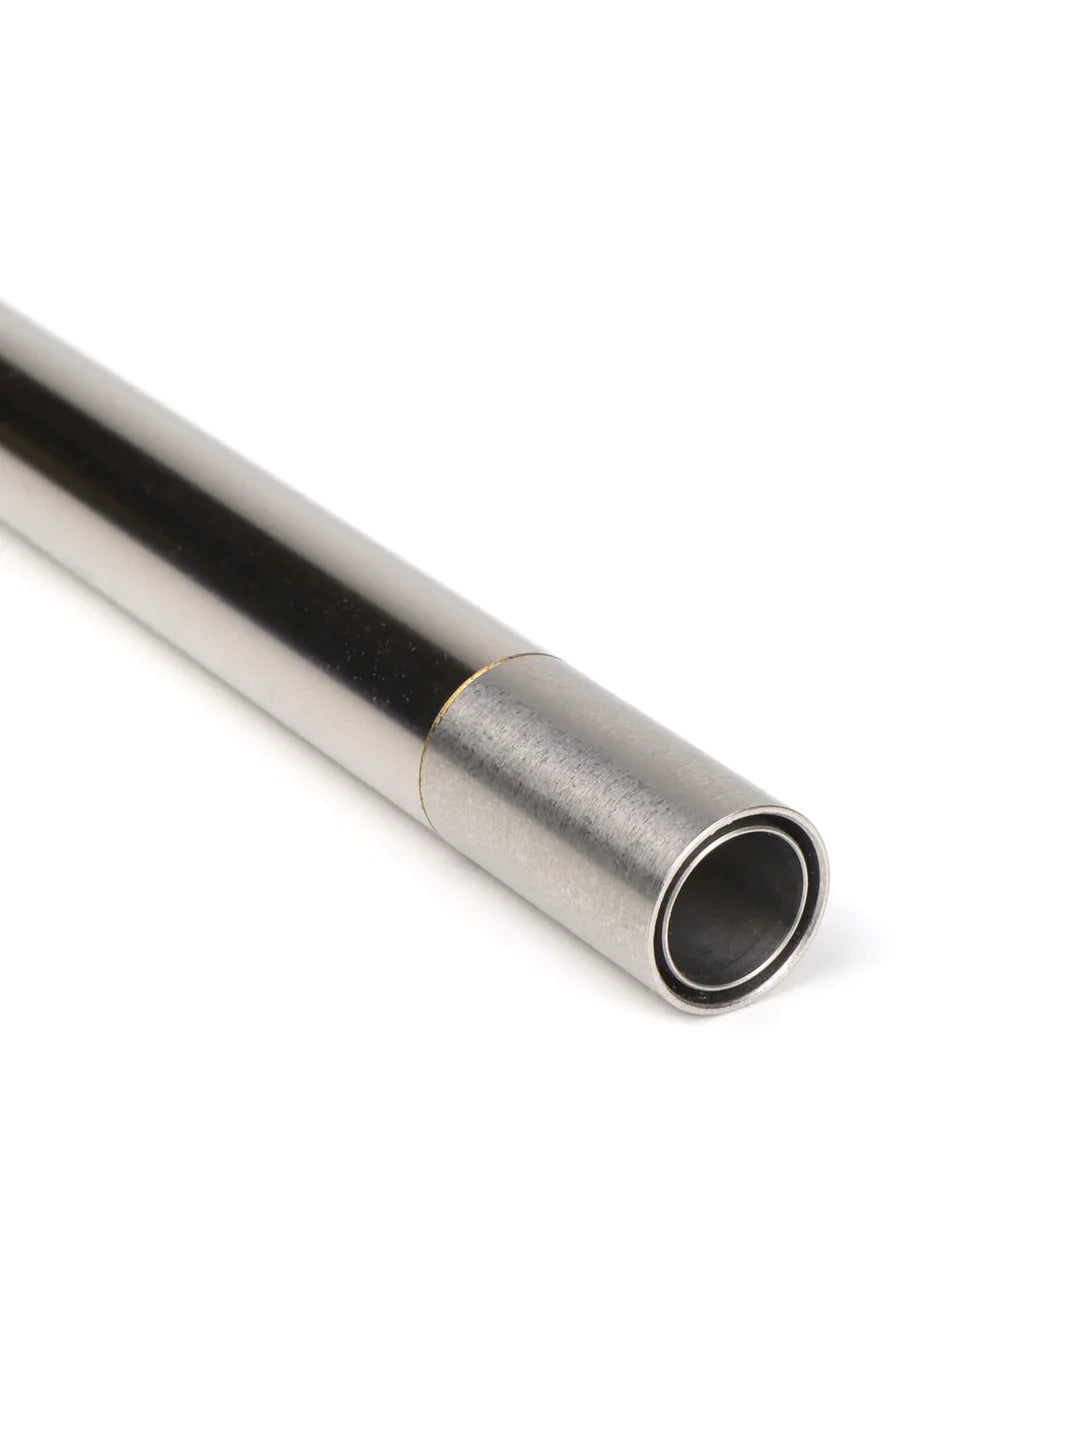 Maple Leaf Crazy Jet 6.01mm Tight Bore Inner Barrel for GBB Rifles - ssairsoft.com